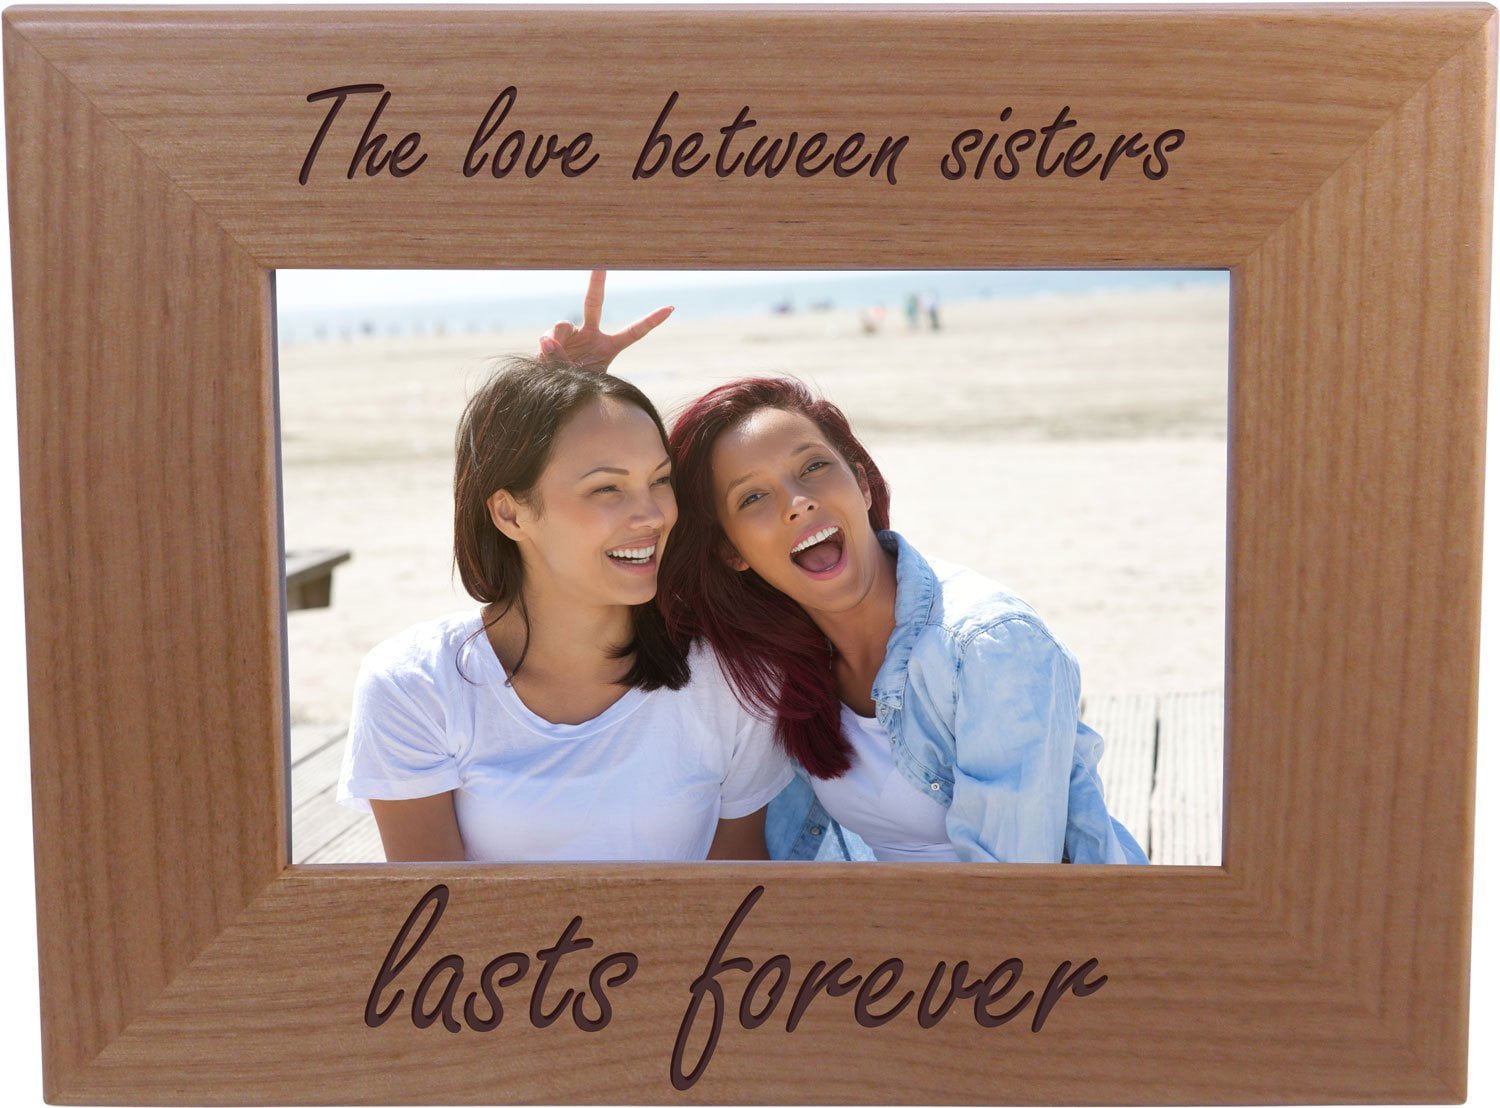 The Love between sisters lasts forever - 4x6 Inch Wood Picture Frame -  Great Gift for Birthday, or Christmas Gift for Sister, Sisters - Walmart.com